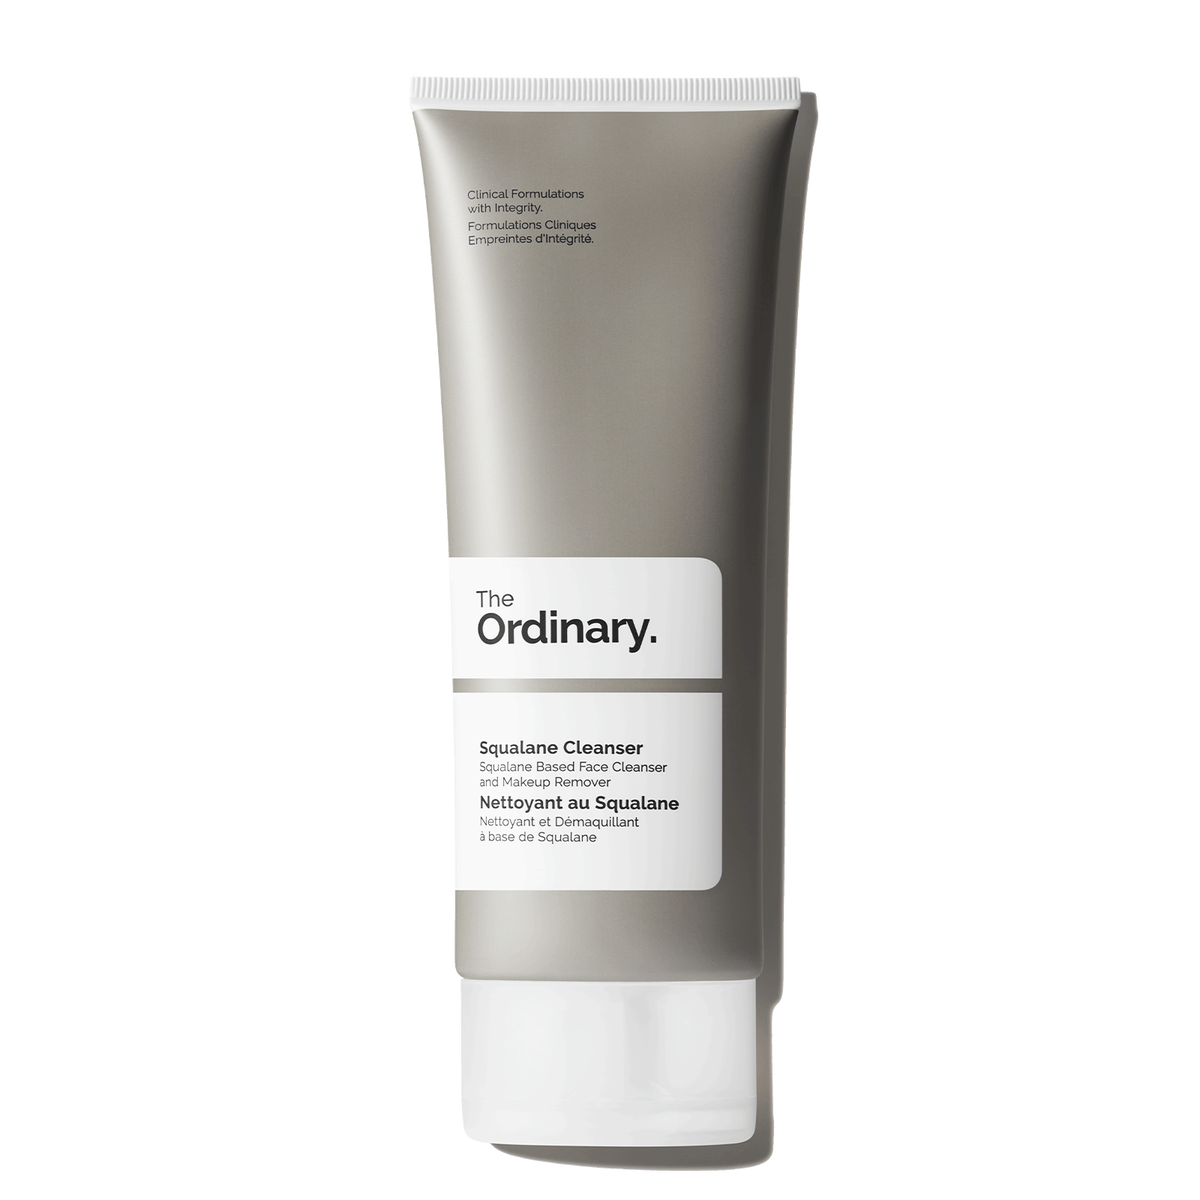 Squalane Cleanser by The Ordinary